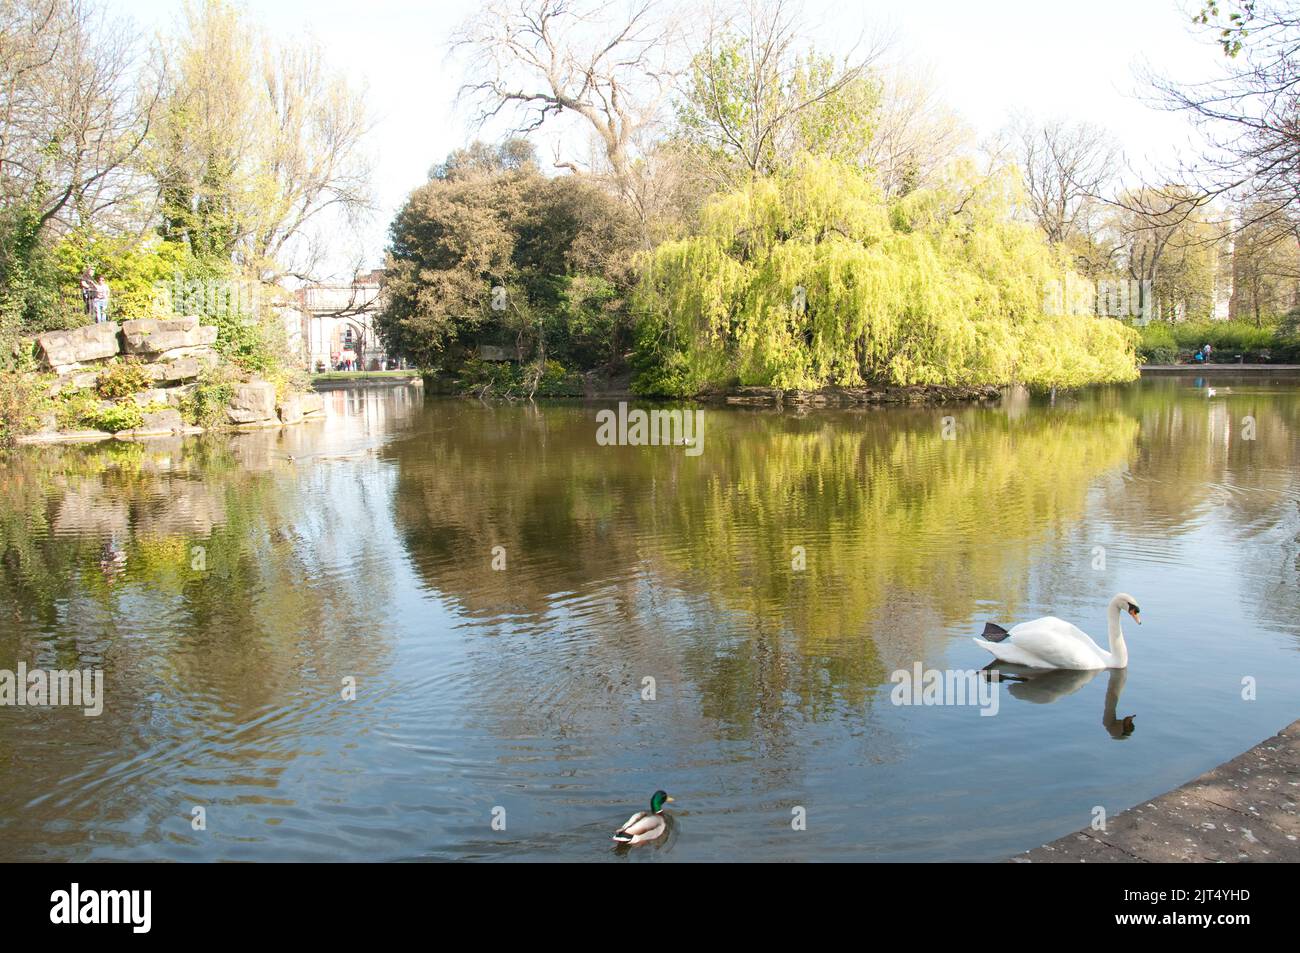 Swan Lake, St Stephen's Green, Dublin, Eire.  St Stephen's Green is a public park in Central Dublin, with large areas for walking and enjoying the gar Stock Photo